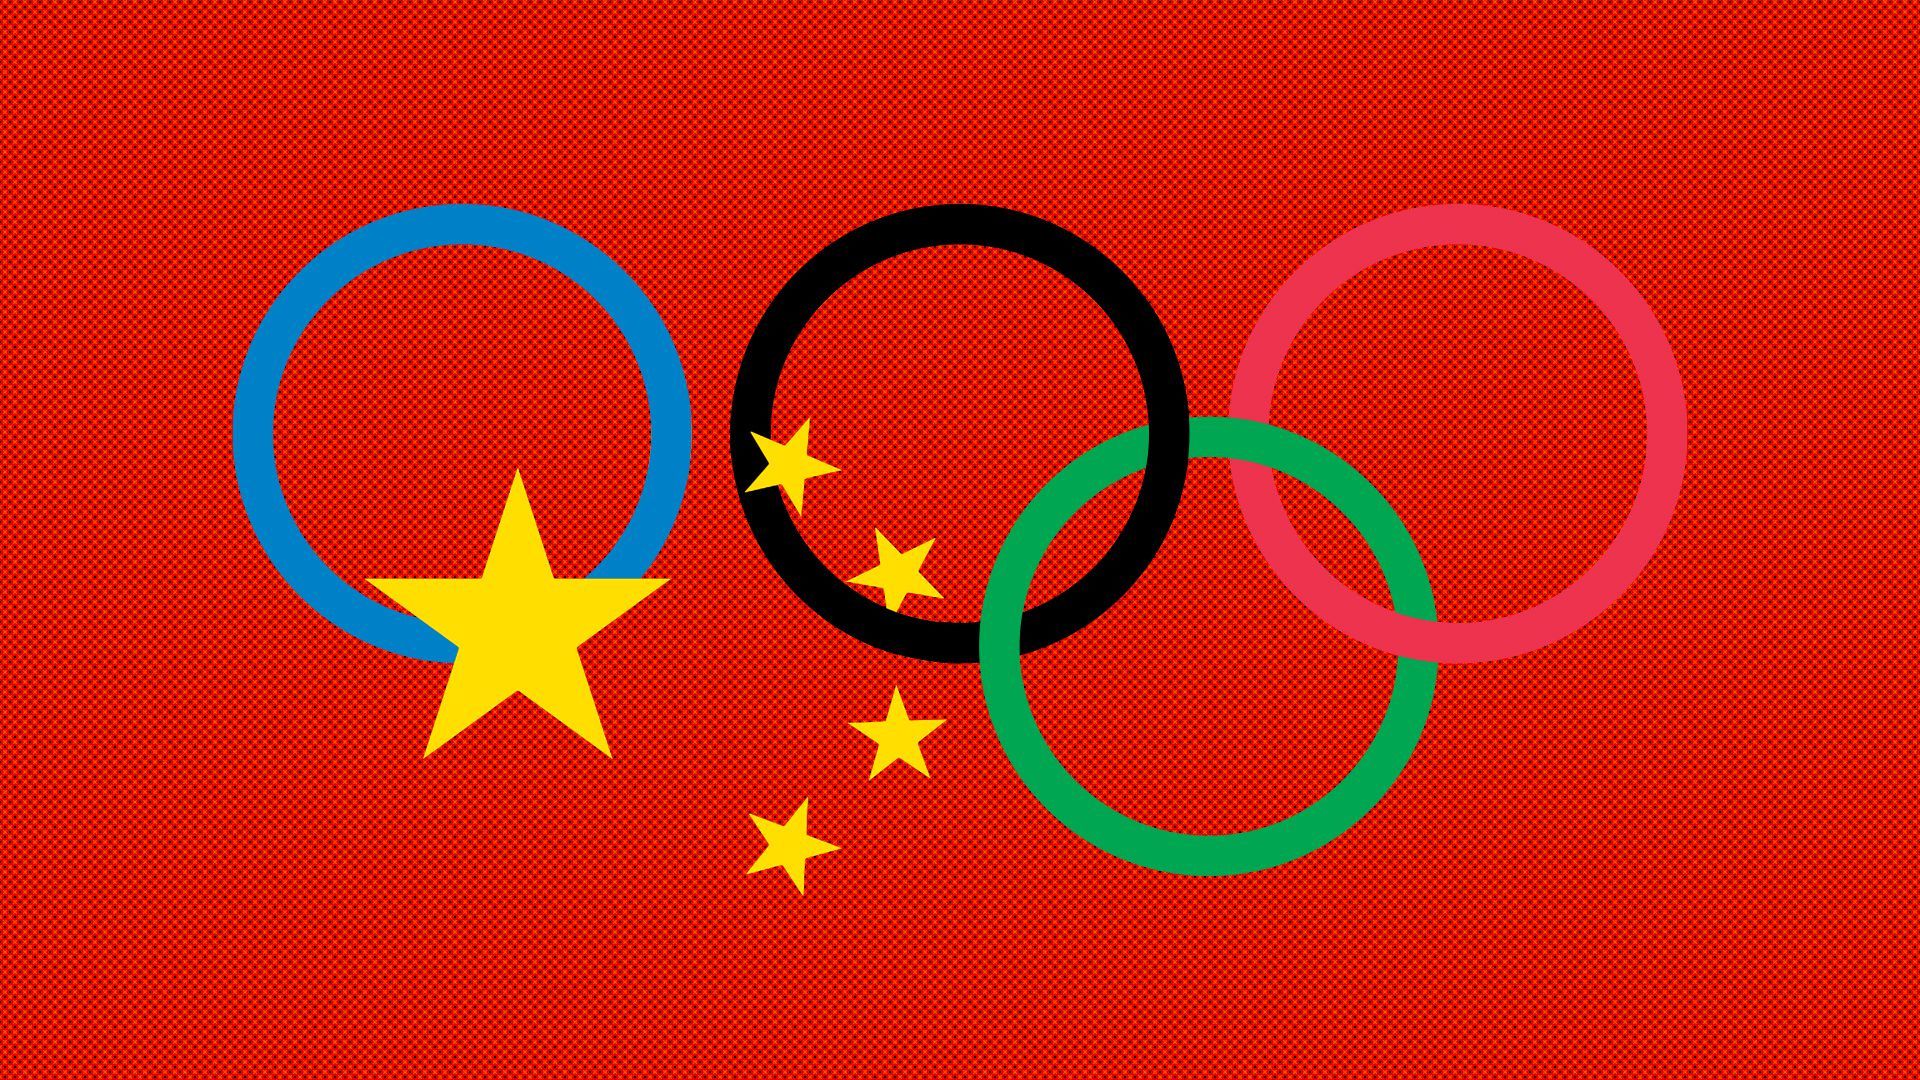 Illustration of the Olympic rings with yellow stars from China's flag replacing the yellow ring.